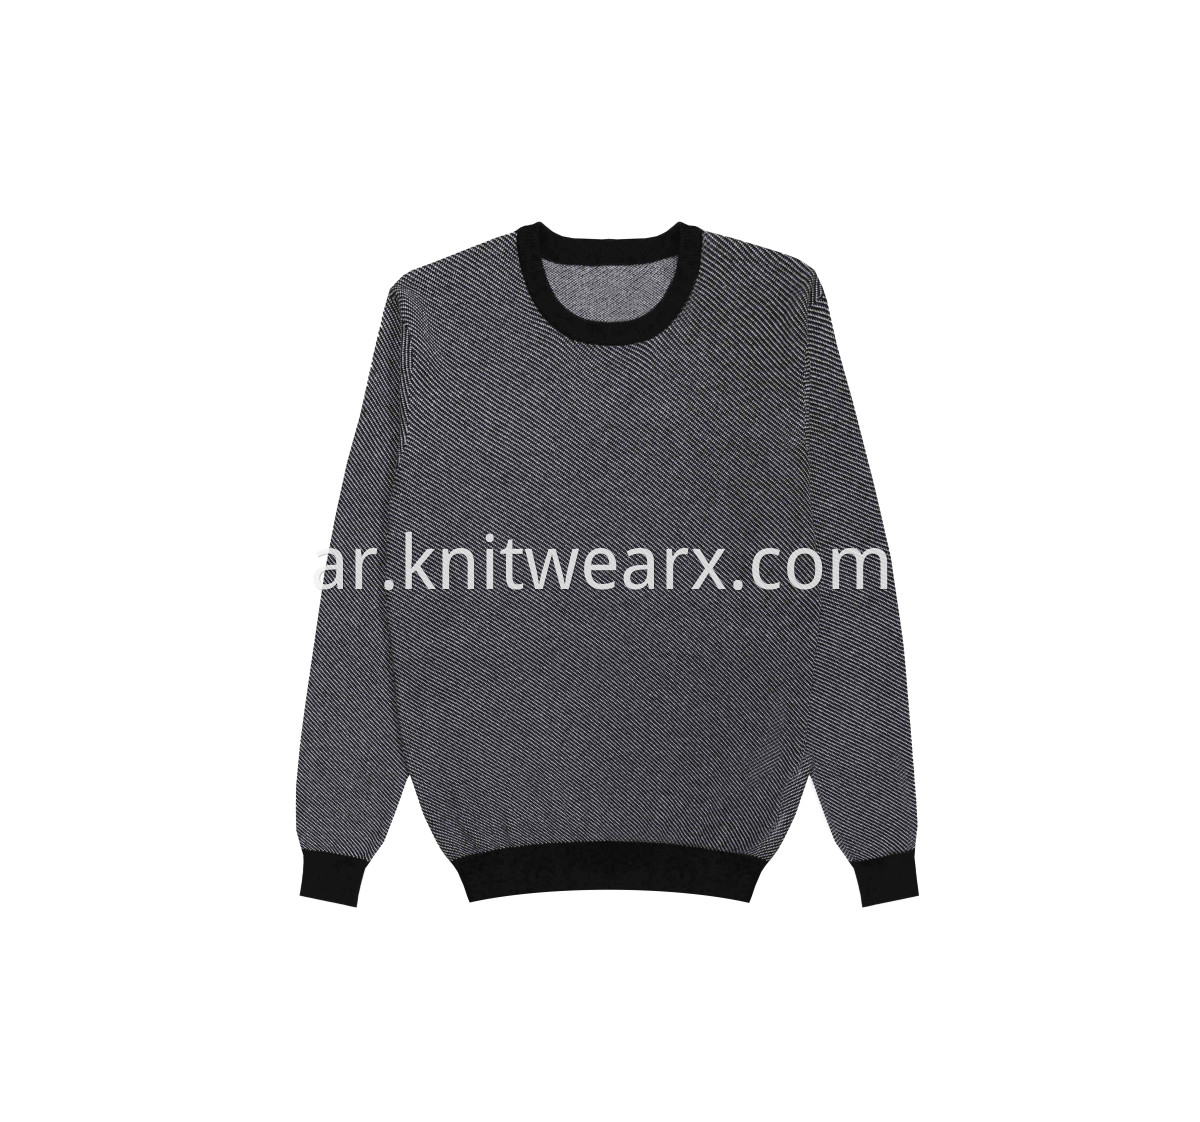 Men's Knitted Tweed Jacquard Soft Crewneck Pullover